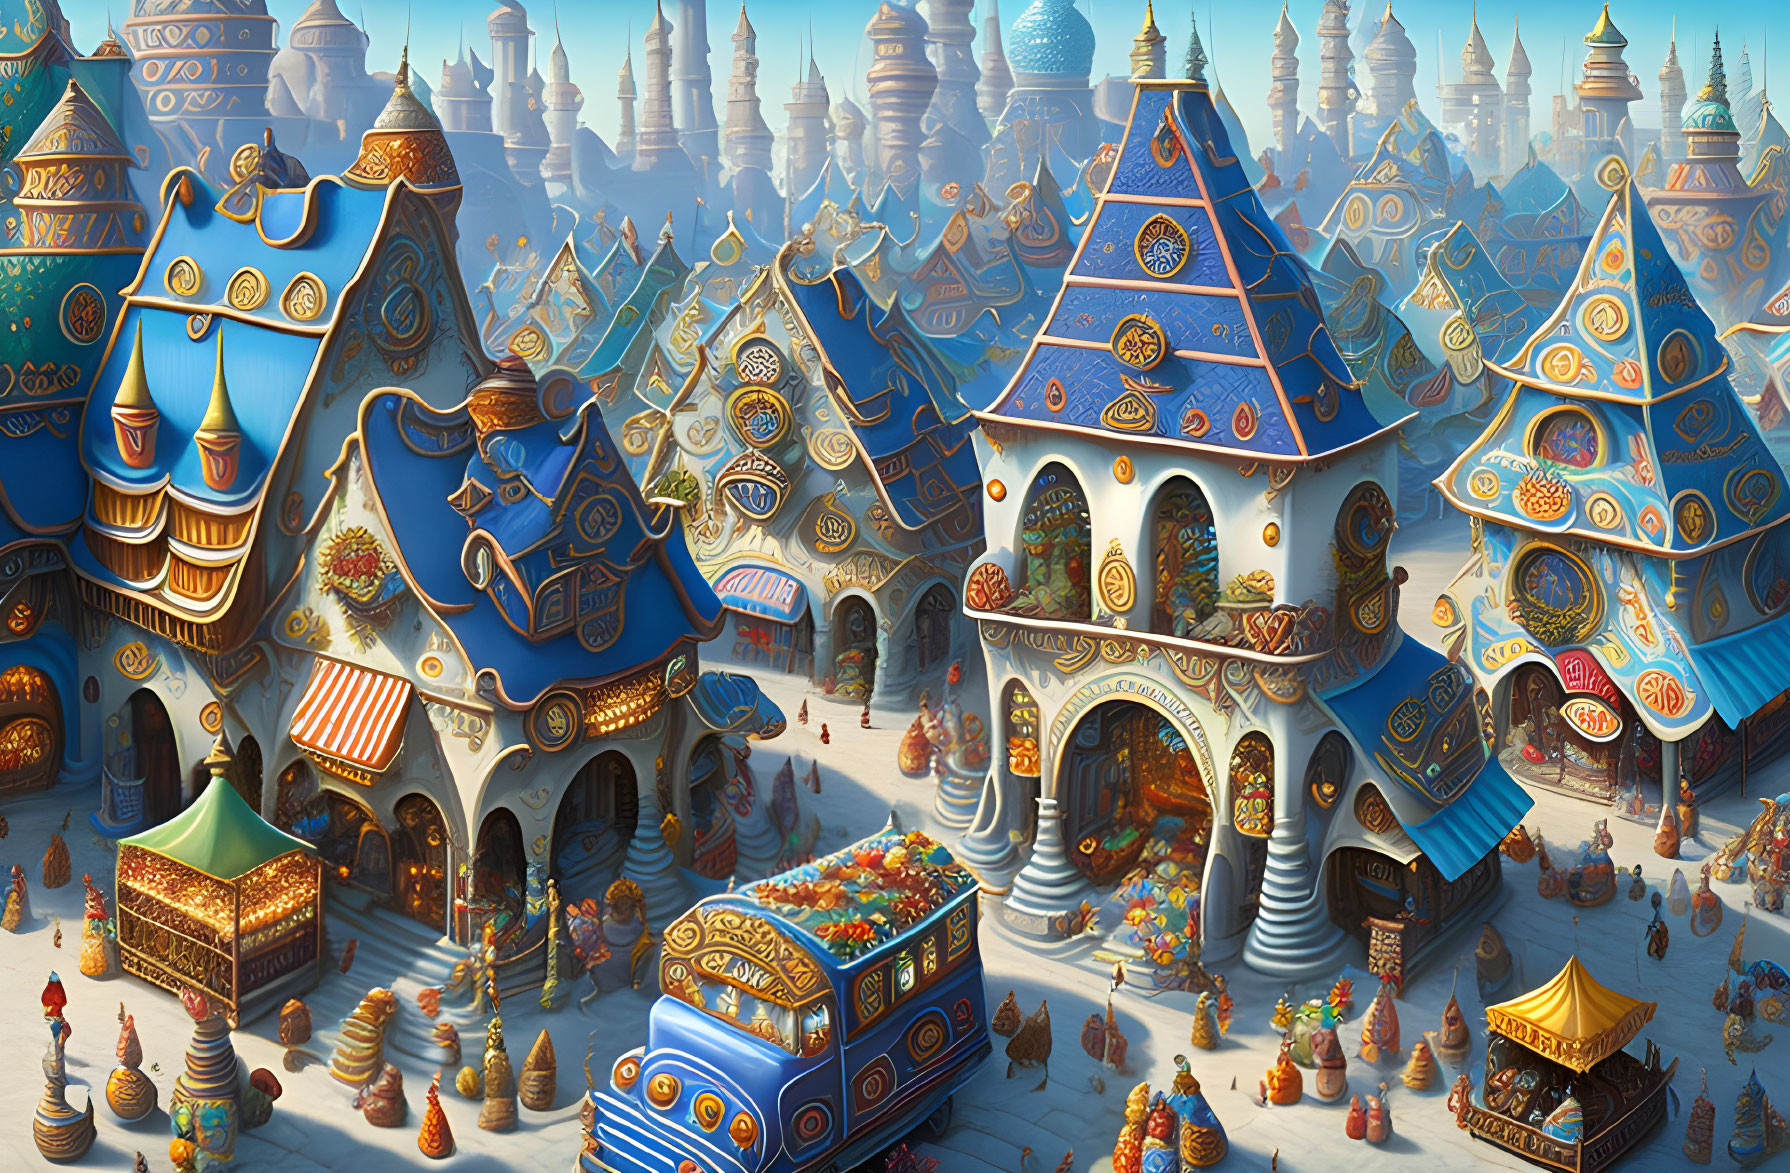 Fantasy Cityscape with Blue-Roofed Buildings and Colorful Market Stalls